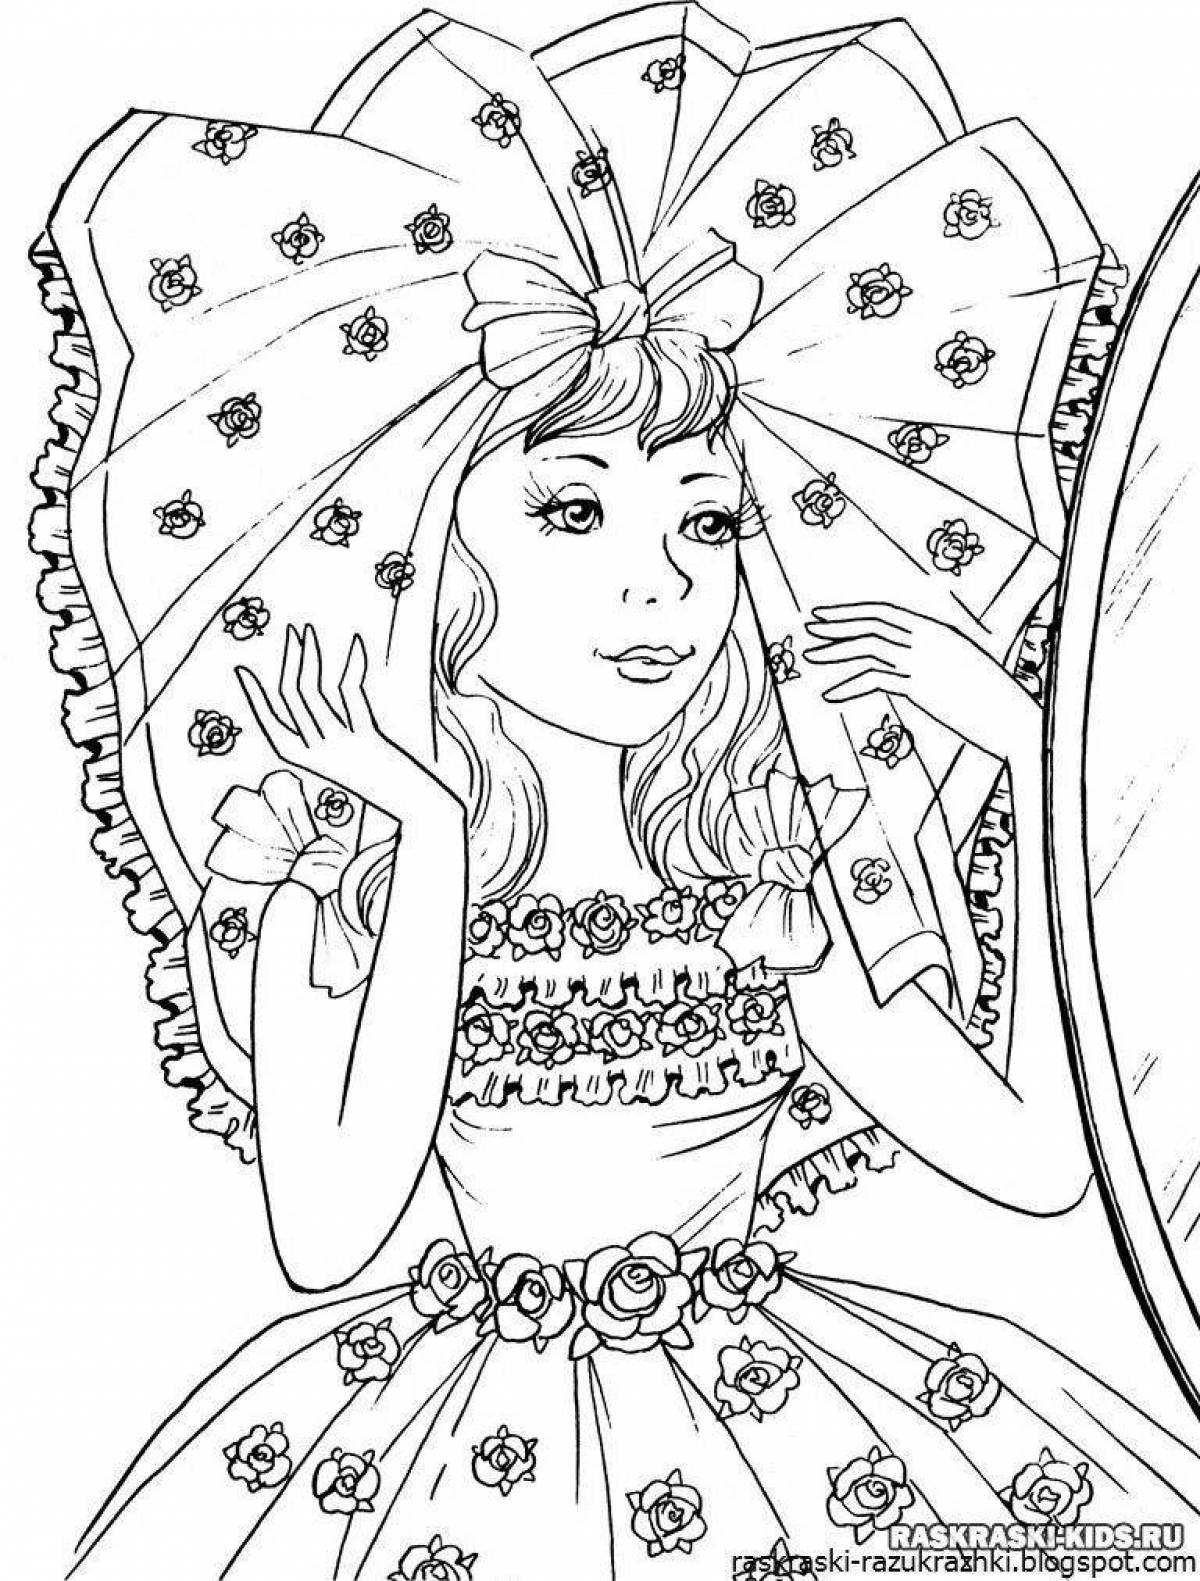 Coloring pages for girls 10